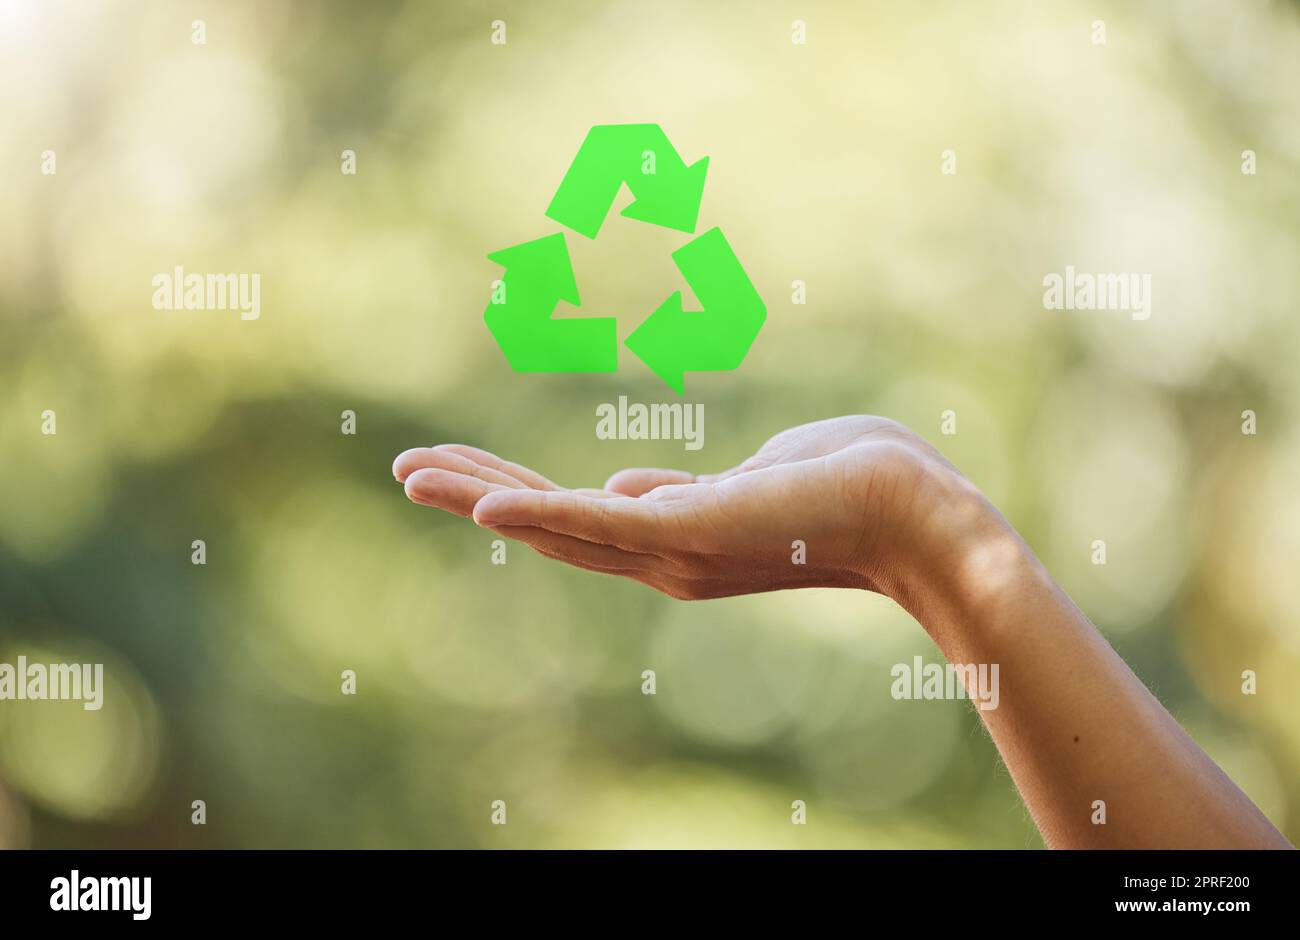 Hand, closeup recycle sign isolated with bokeh effect background. Zero waste, ecology and environmental symbol for sustainable living. Clean and eco friendly habits to protect and save the earth. Stock Photo